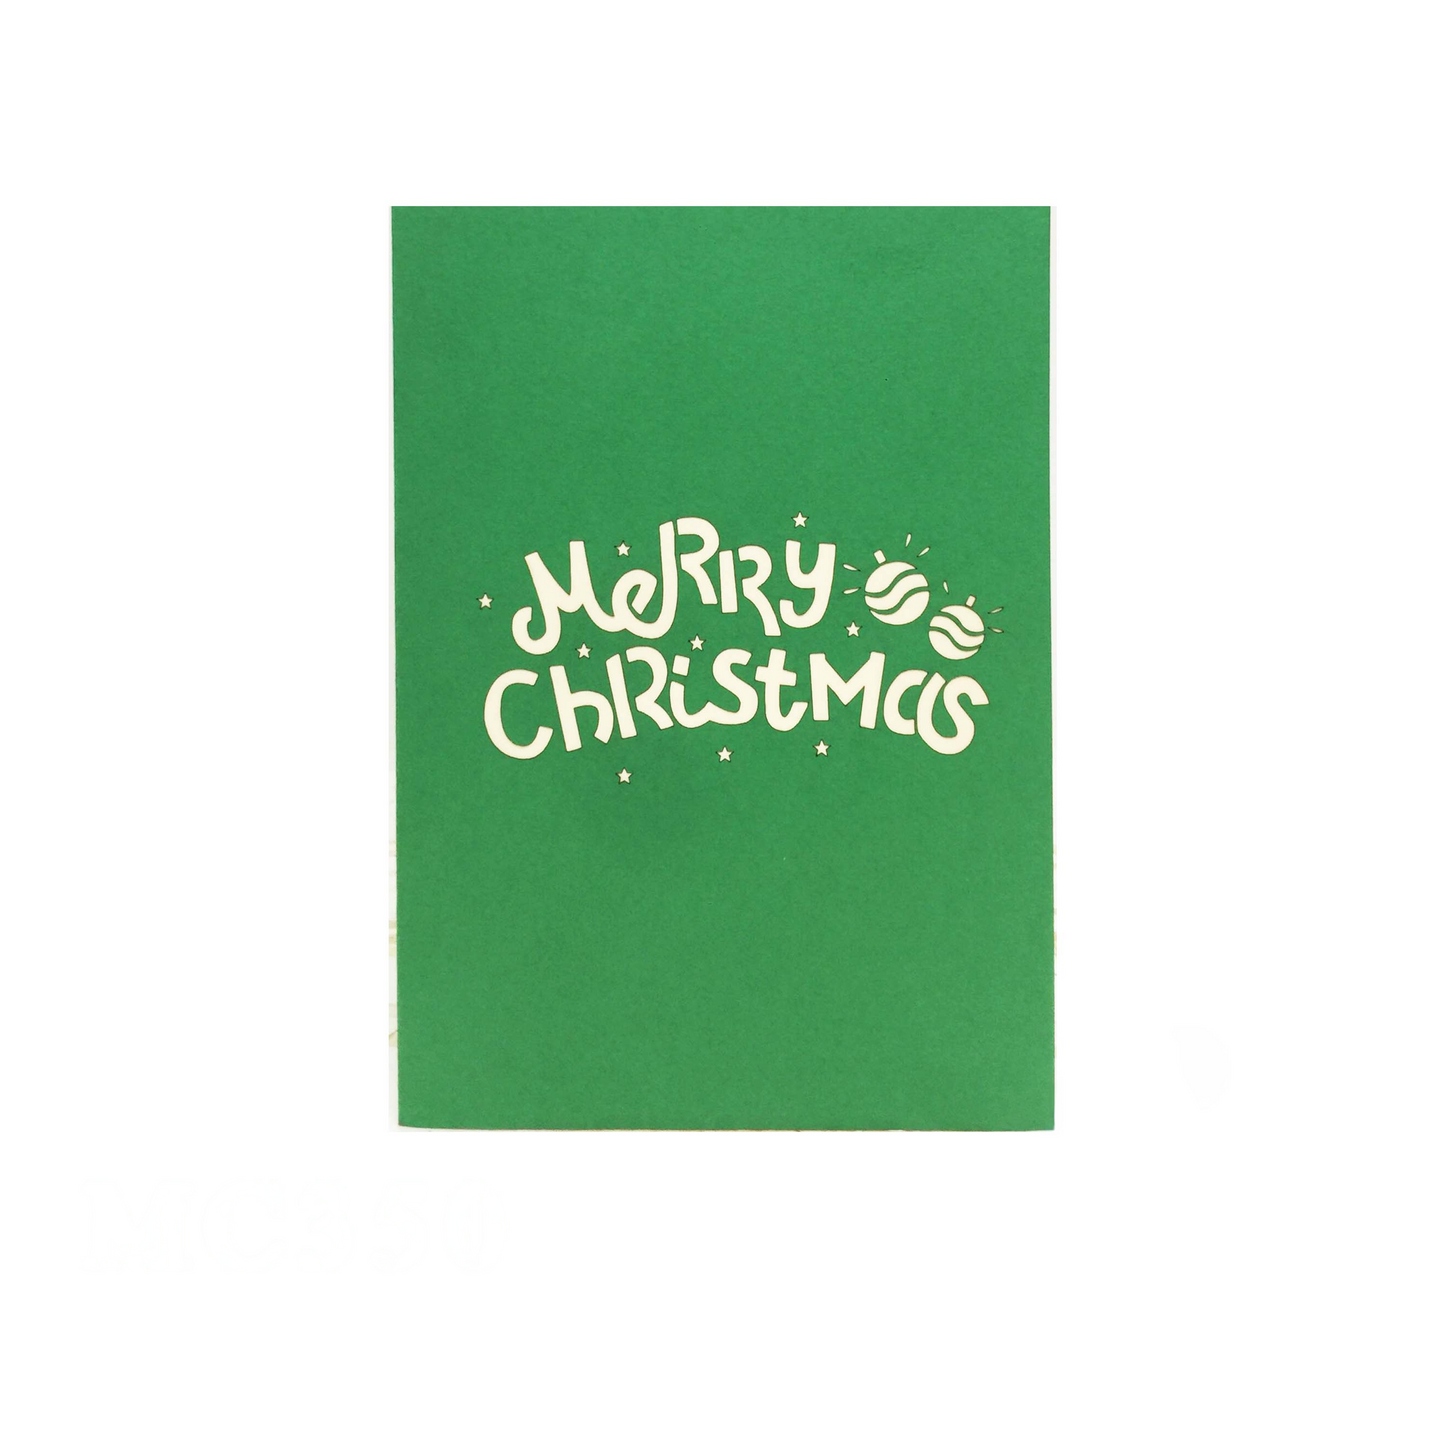 Merry Christmas Letters Pop Up Card